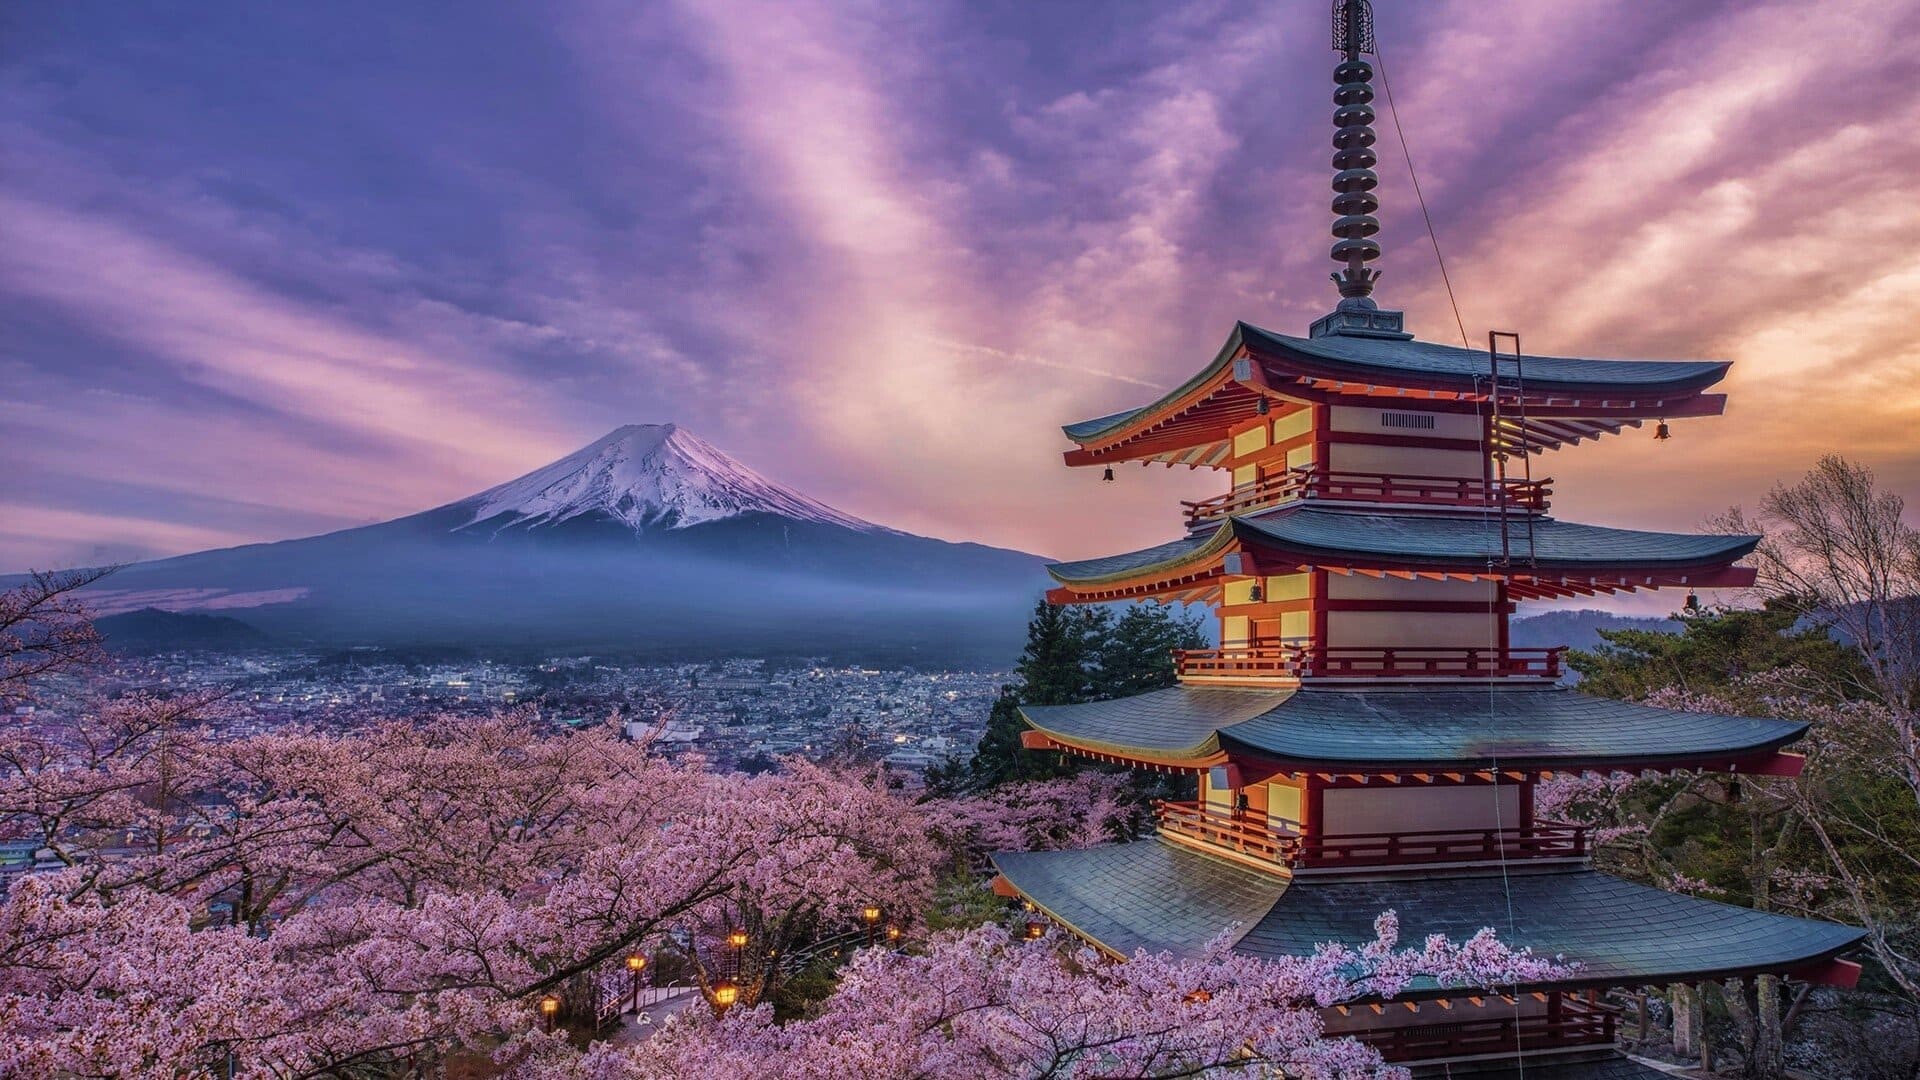 Japan: Mount Fuji, The country adopted the Meiji Constitution on November 29th, 1890. 1920x1080 Full HD Wallpaper.